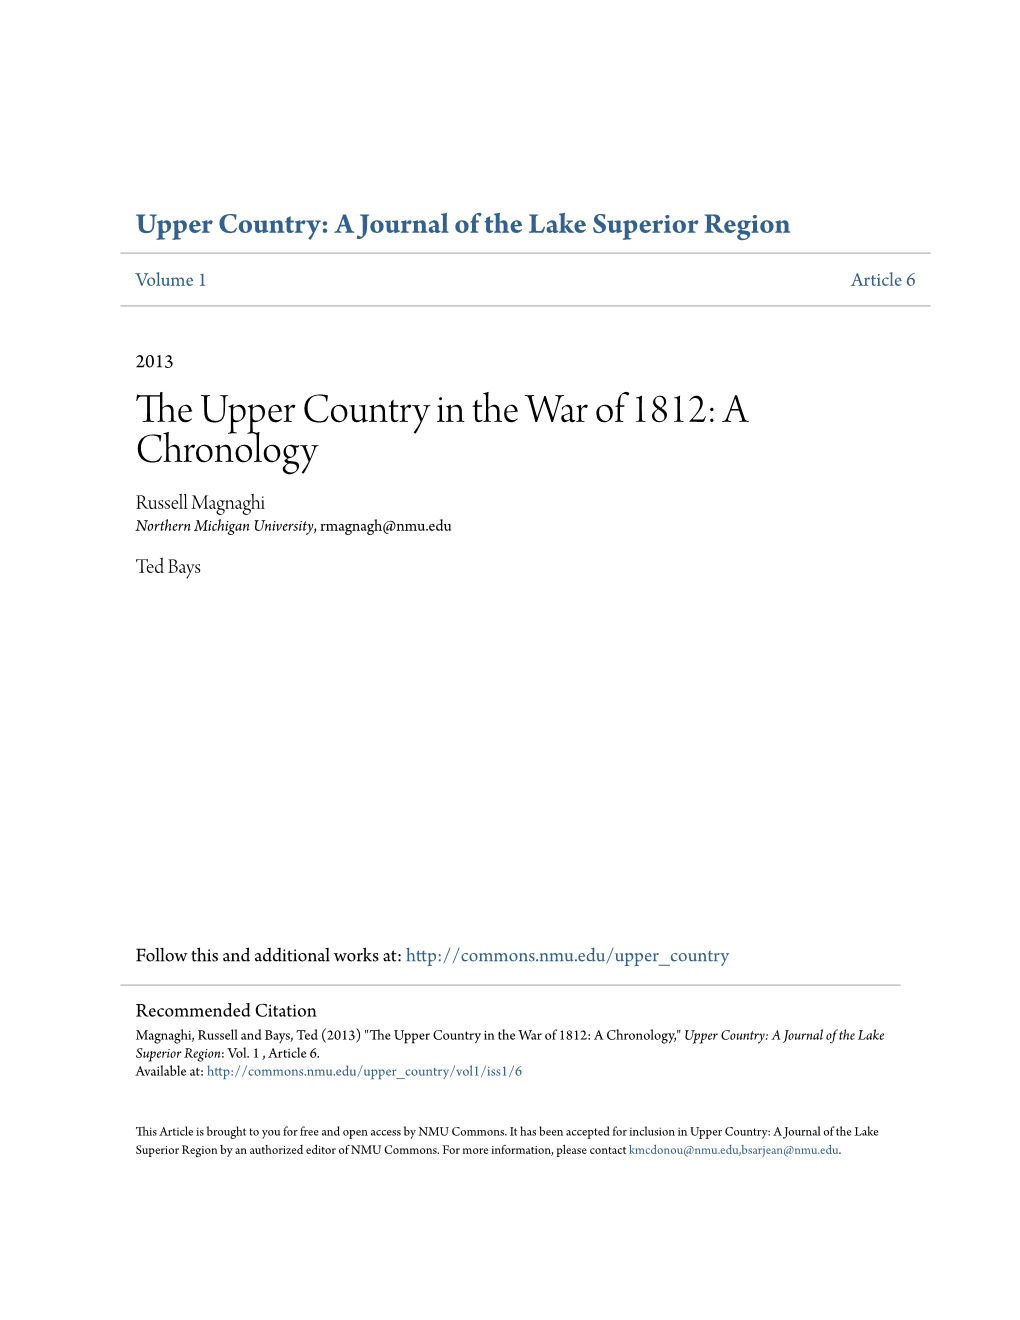 The Upper Country in the War of 1812: a Chronology